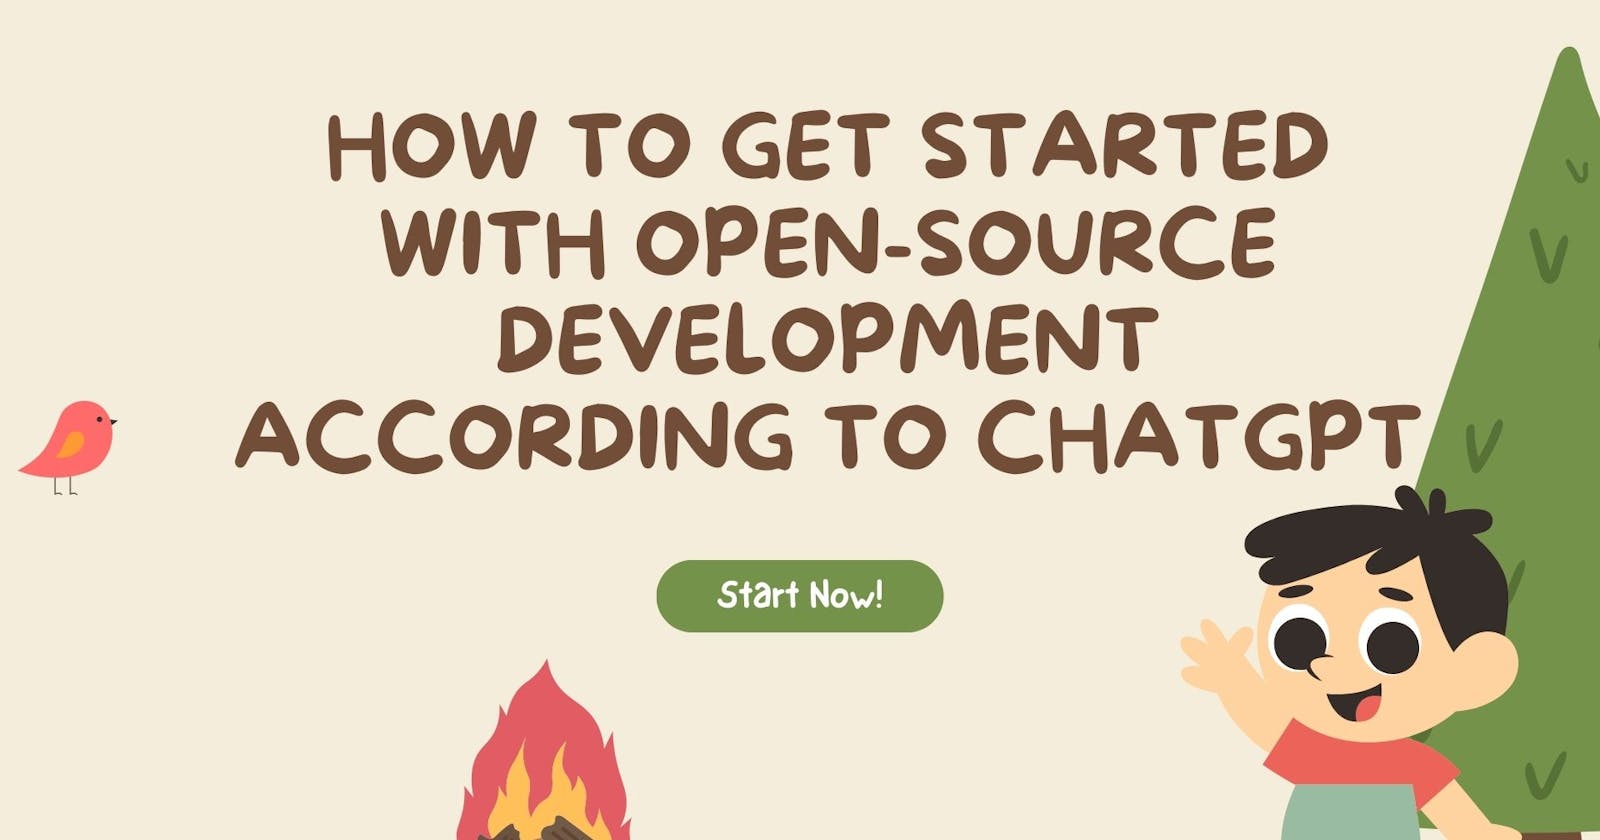 How to get started with open-source development according to chatGPT